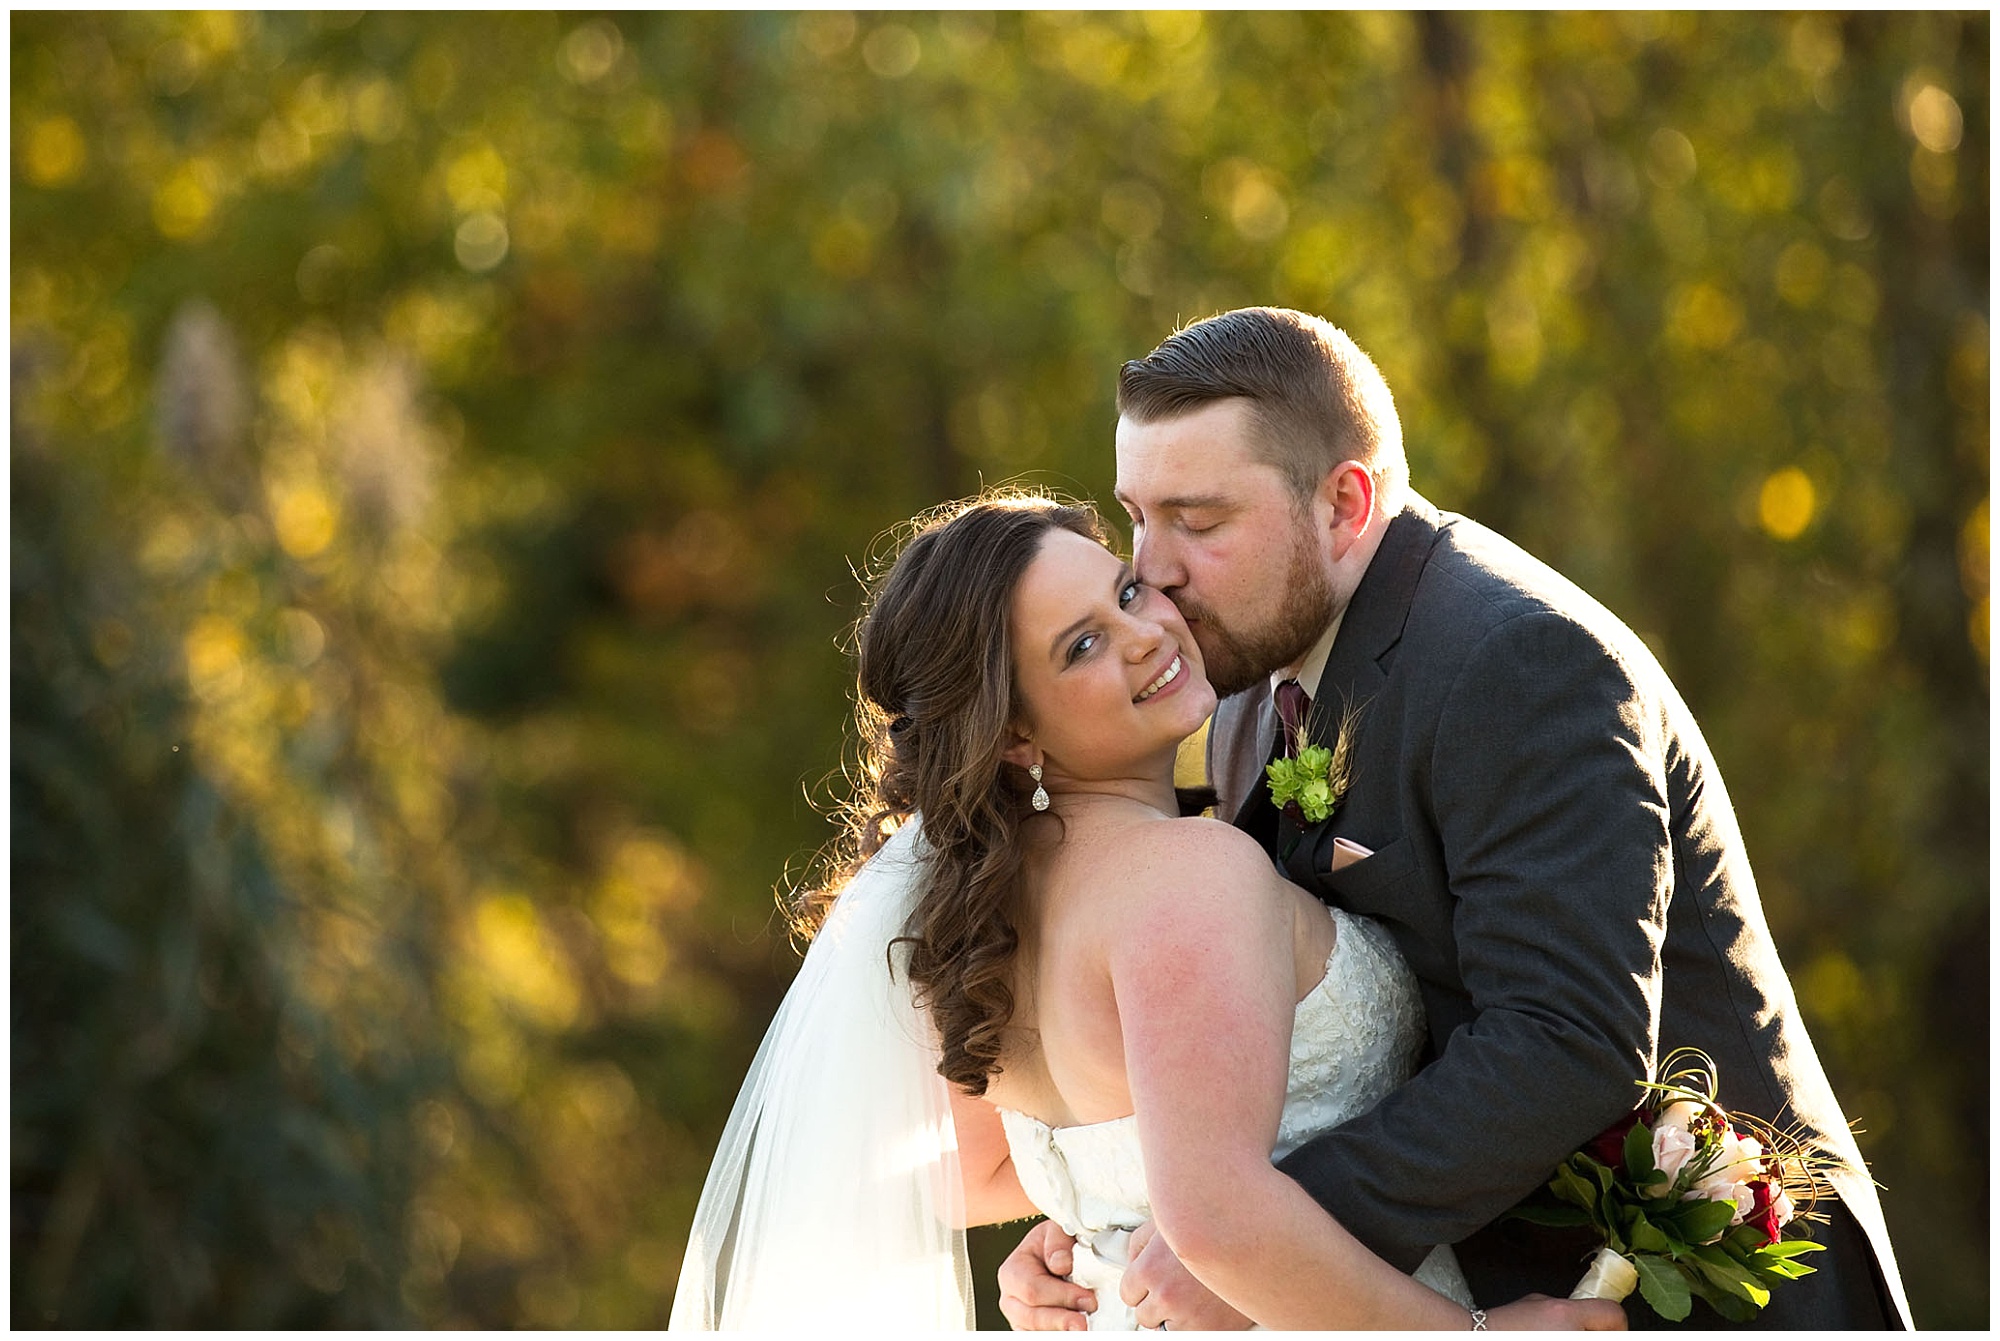 A photo of the groom kissing his bride while she leans back slightly looking back at the camera lens while backlighted by the late autumn afternoon sun.